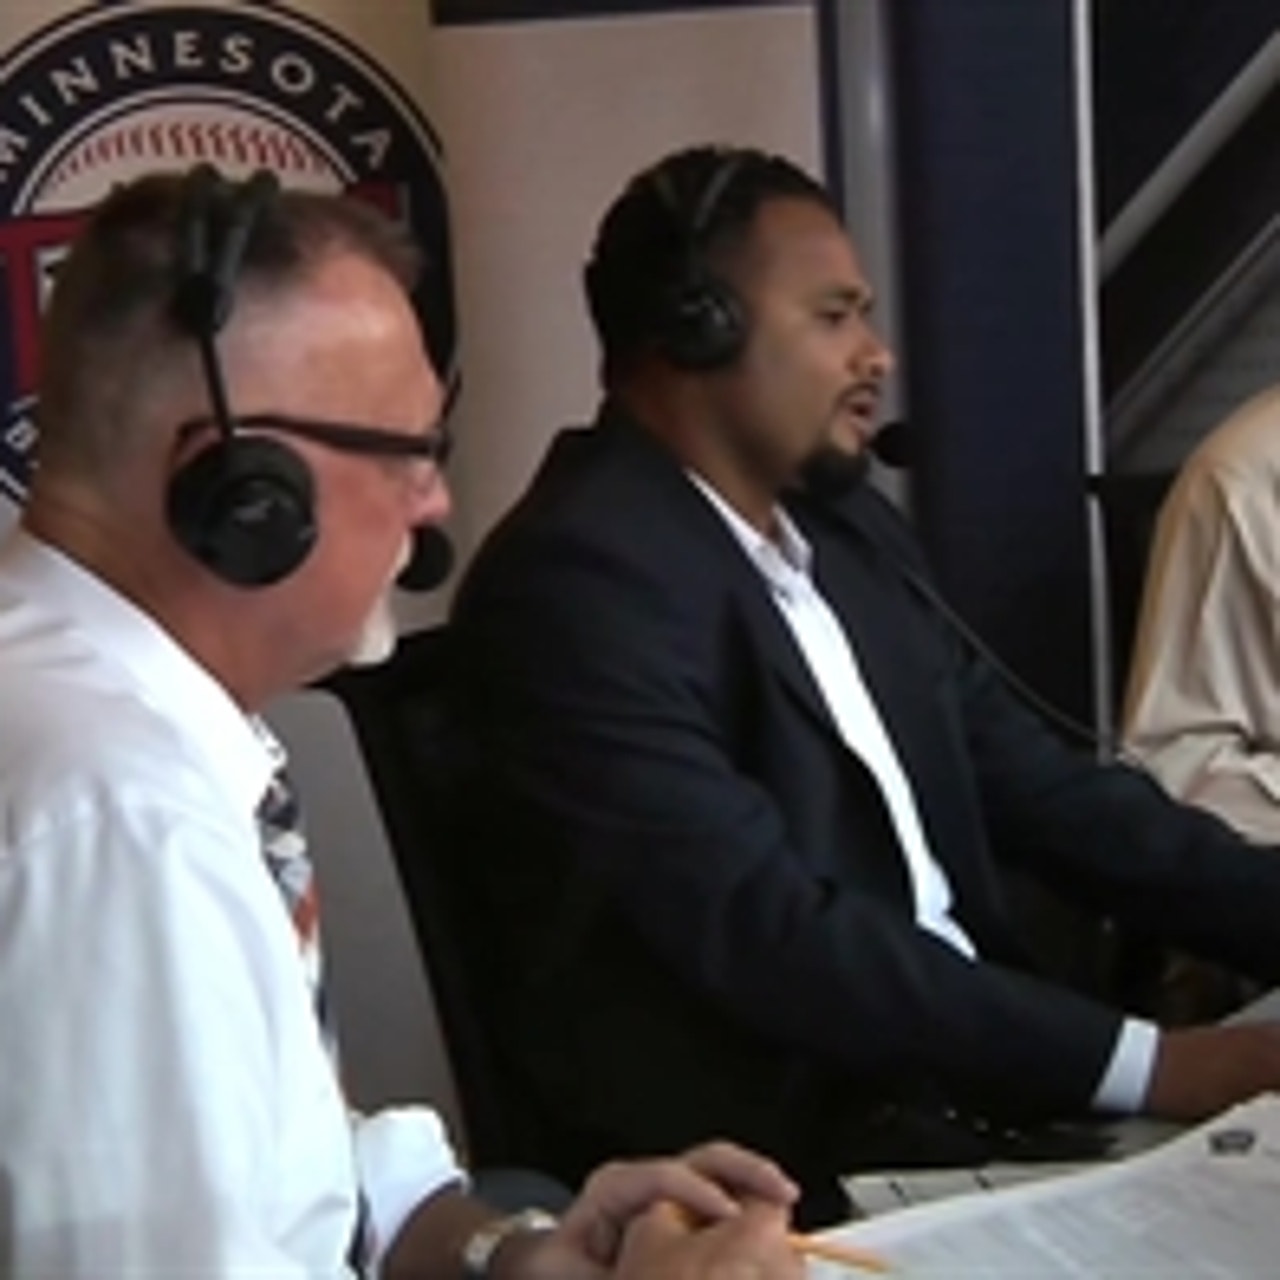 Longtime Twins broadcaster Bert Blyleven hangs up the mic